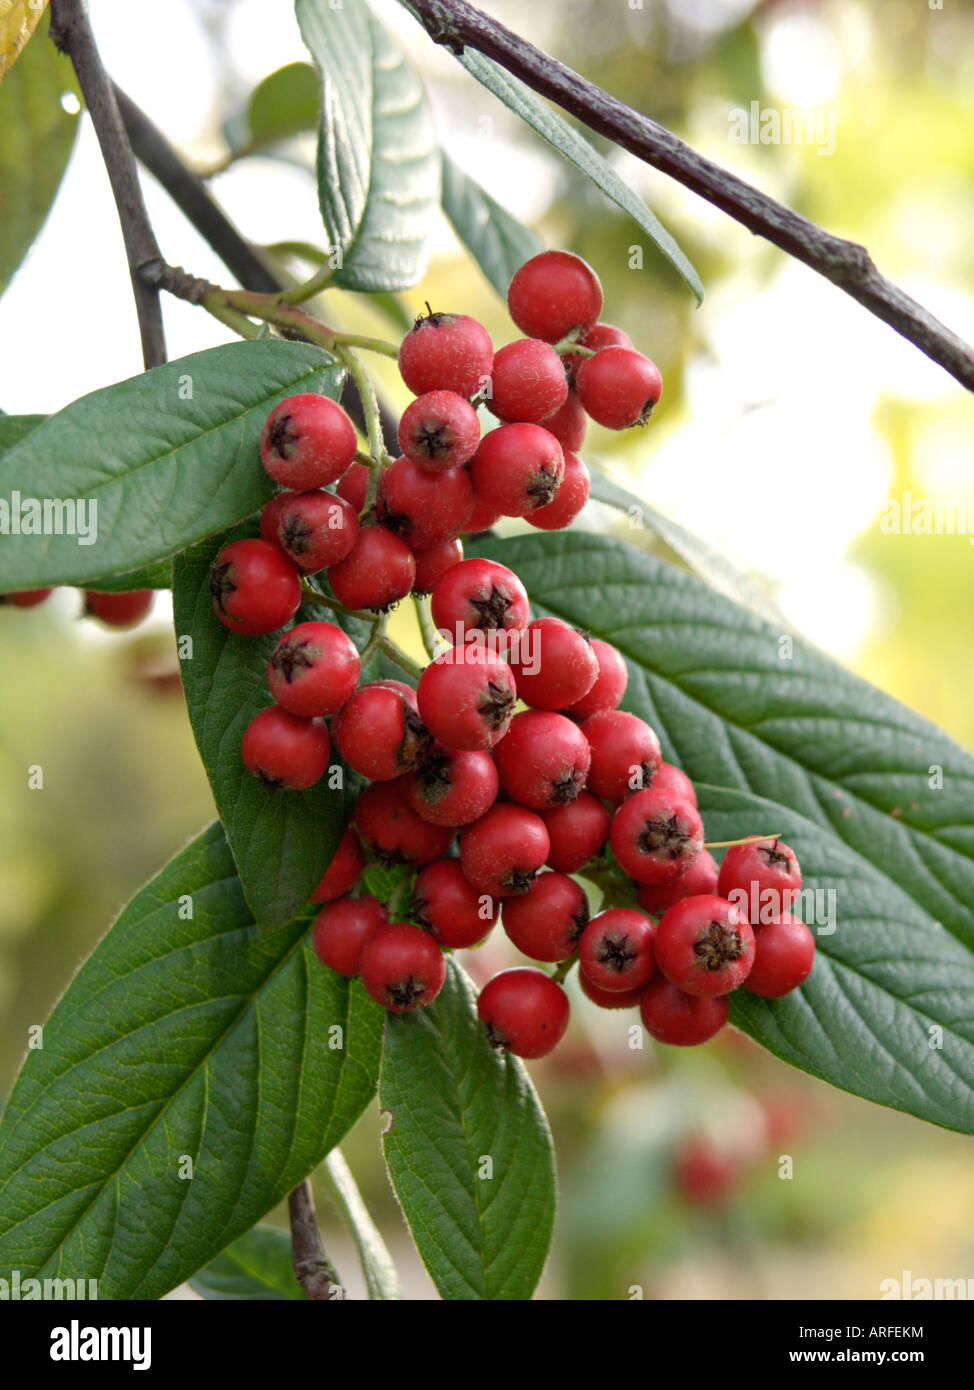 Willow-leaved cotoneaster (Cotoneaster salicifolius) Stock Photo